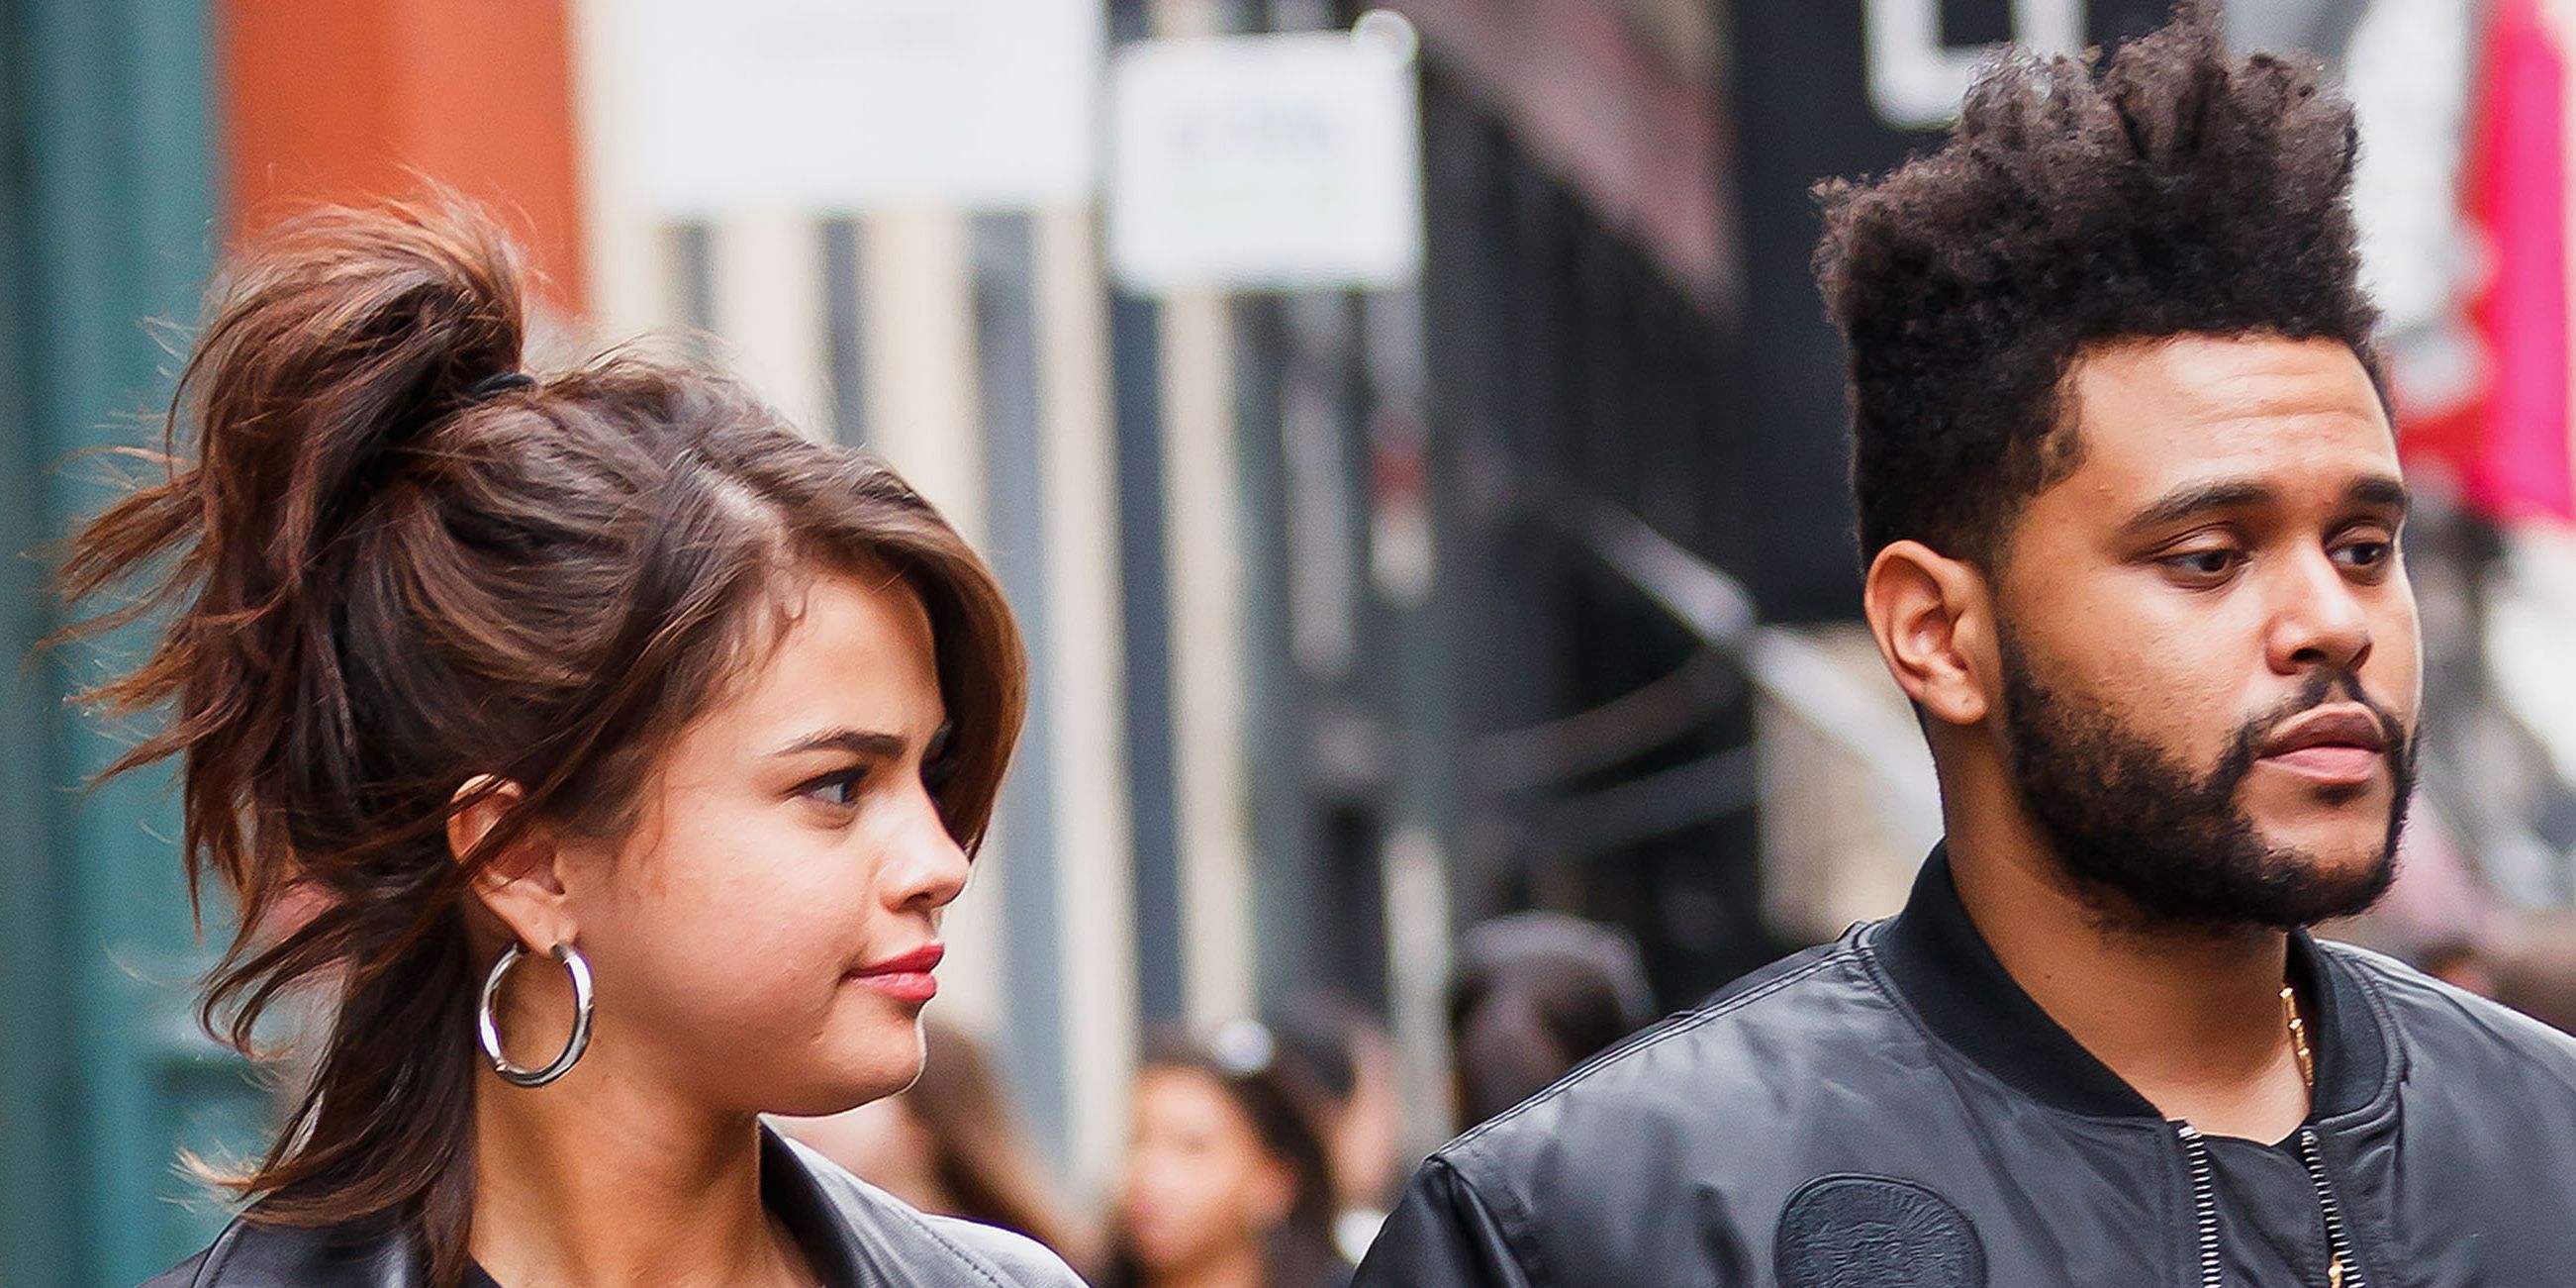 Selena Gomez and The Weeknd Just Wore Matching Outfits on Their Latest Date